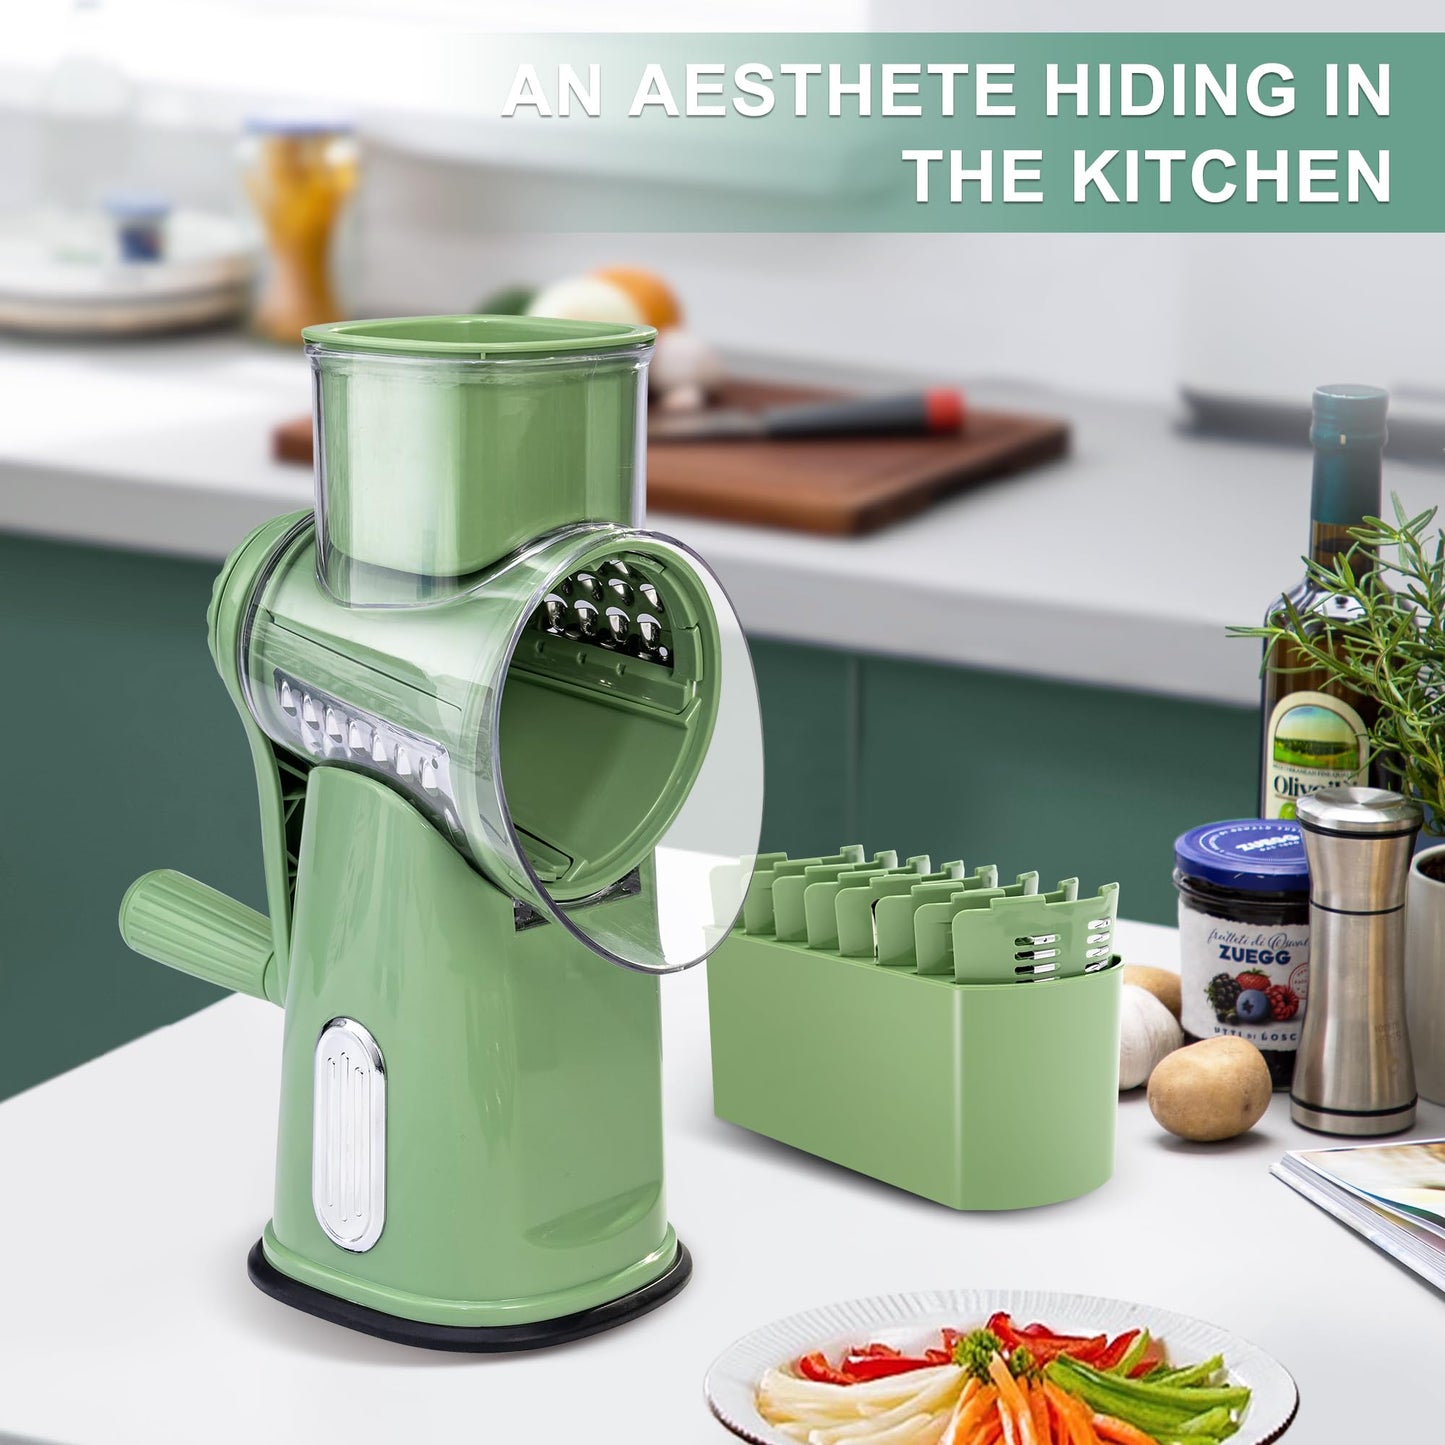 Vegetable Cheese Grater (Green)